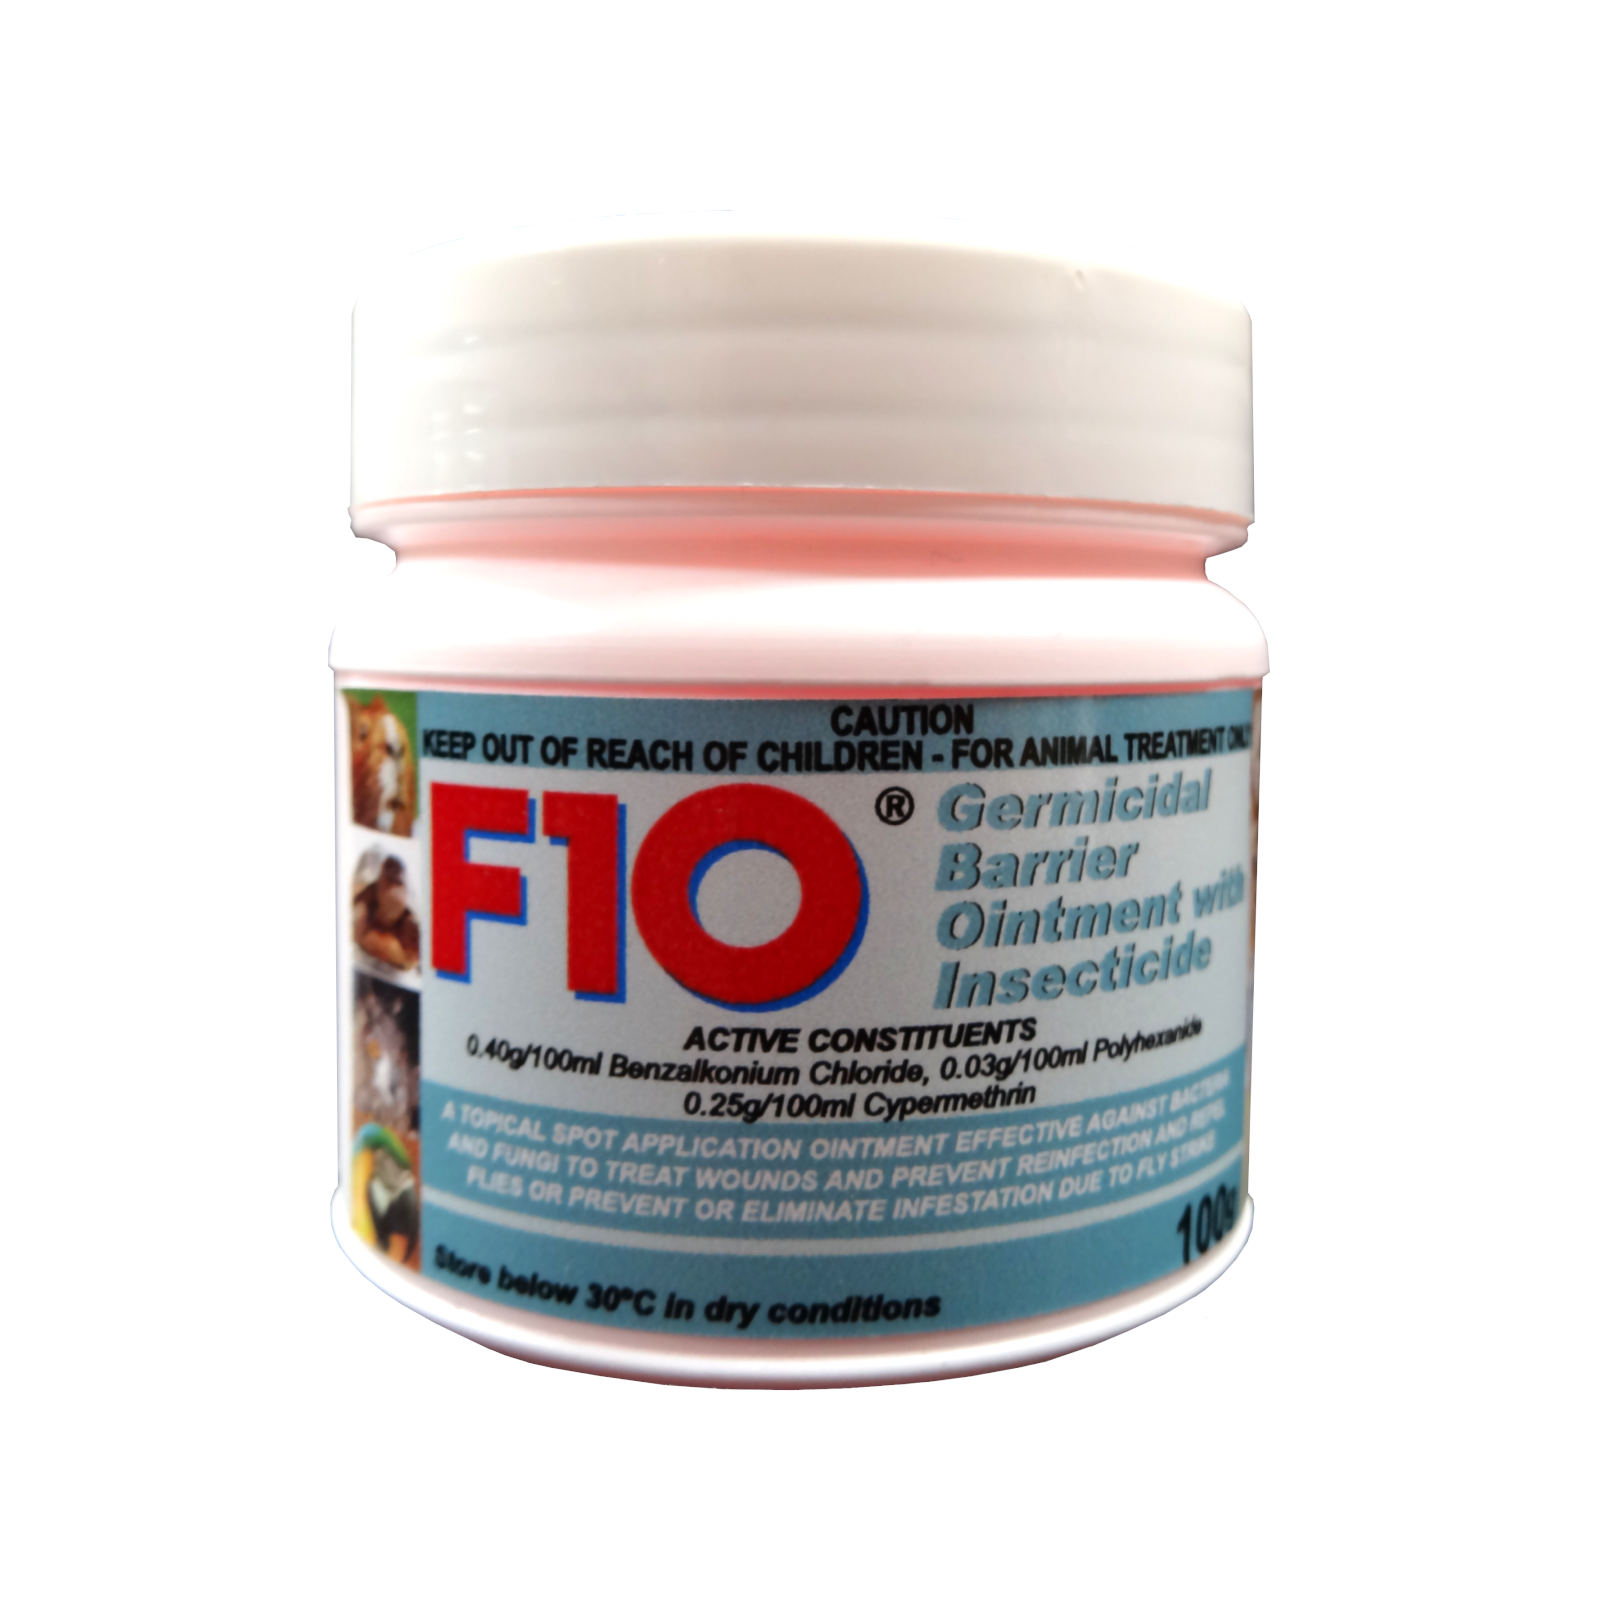 A 100g tub of F10 Germidical Barrier Ointment with Insecticide